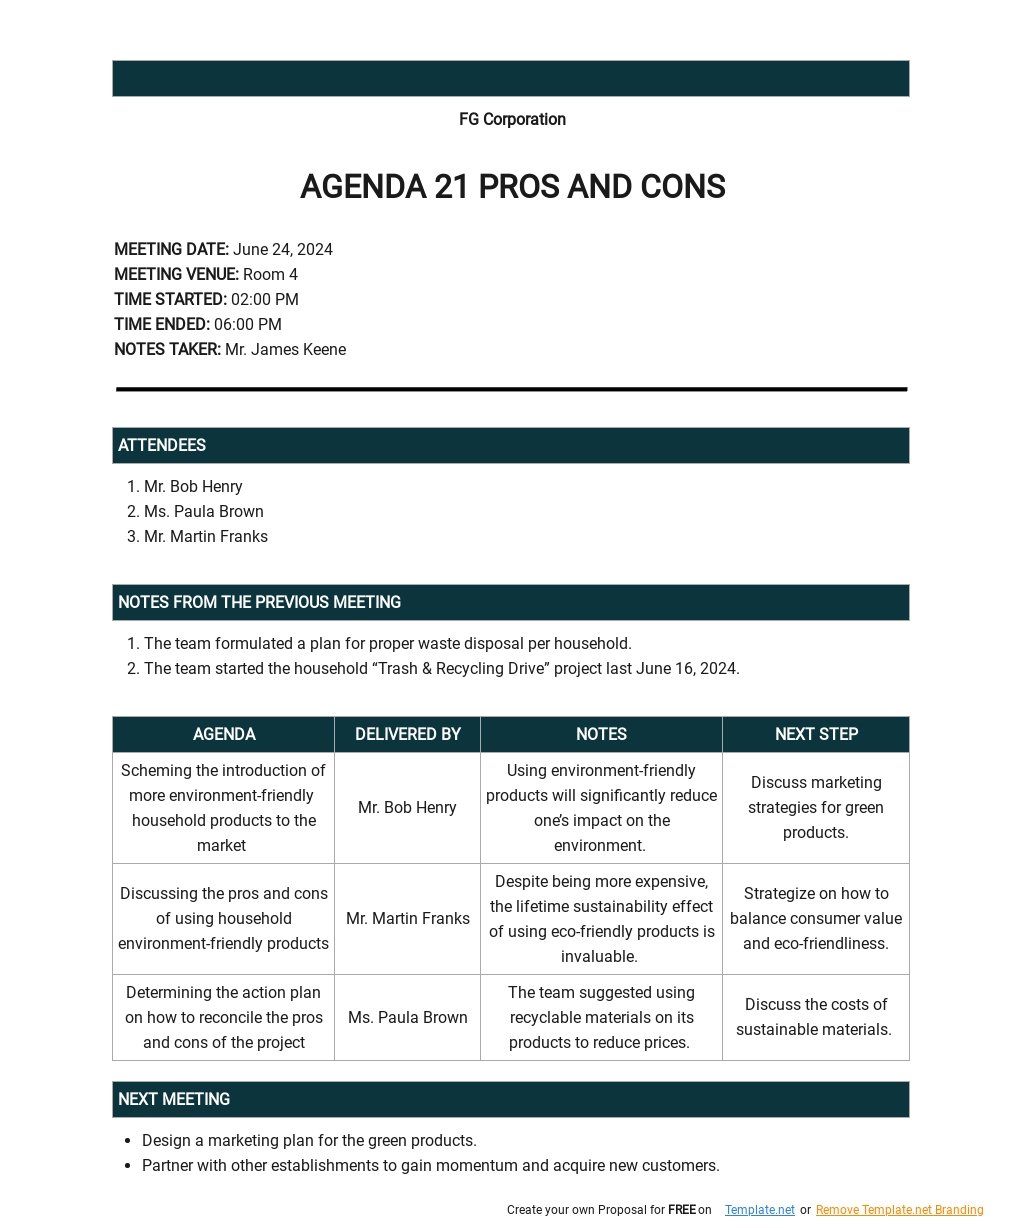 Agenda 21 Pros and Cons Template in Word, Google Docs, Apple Pages